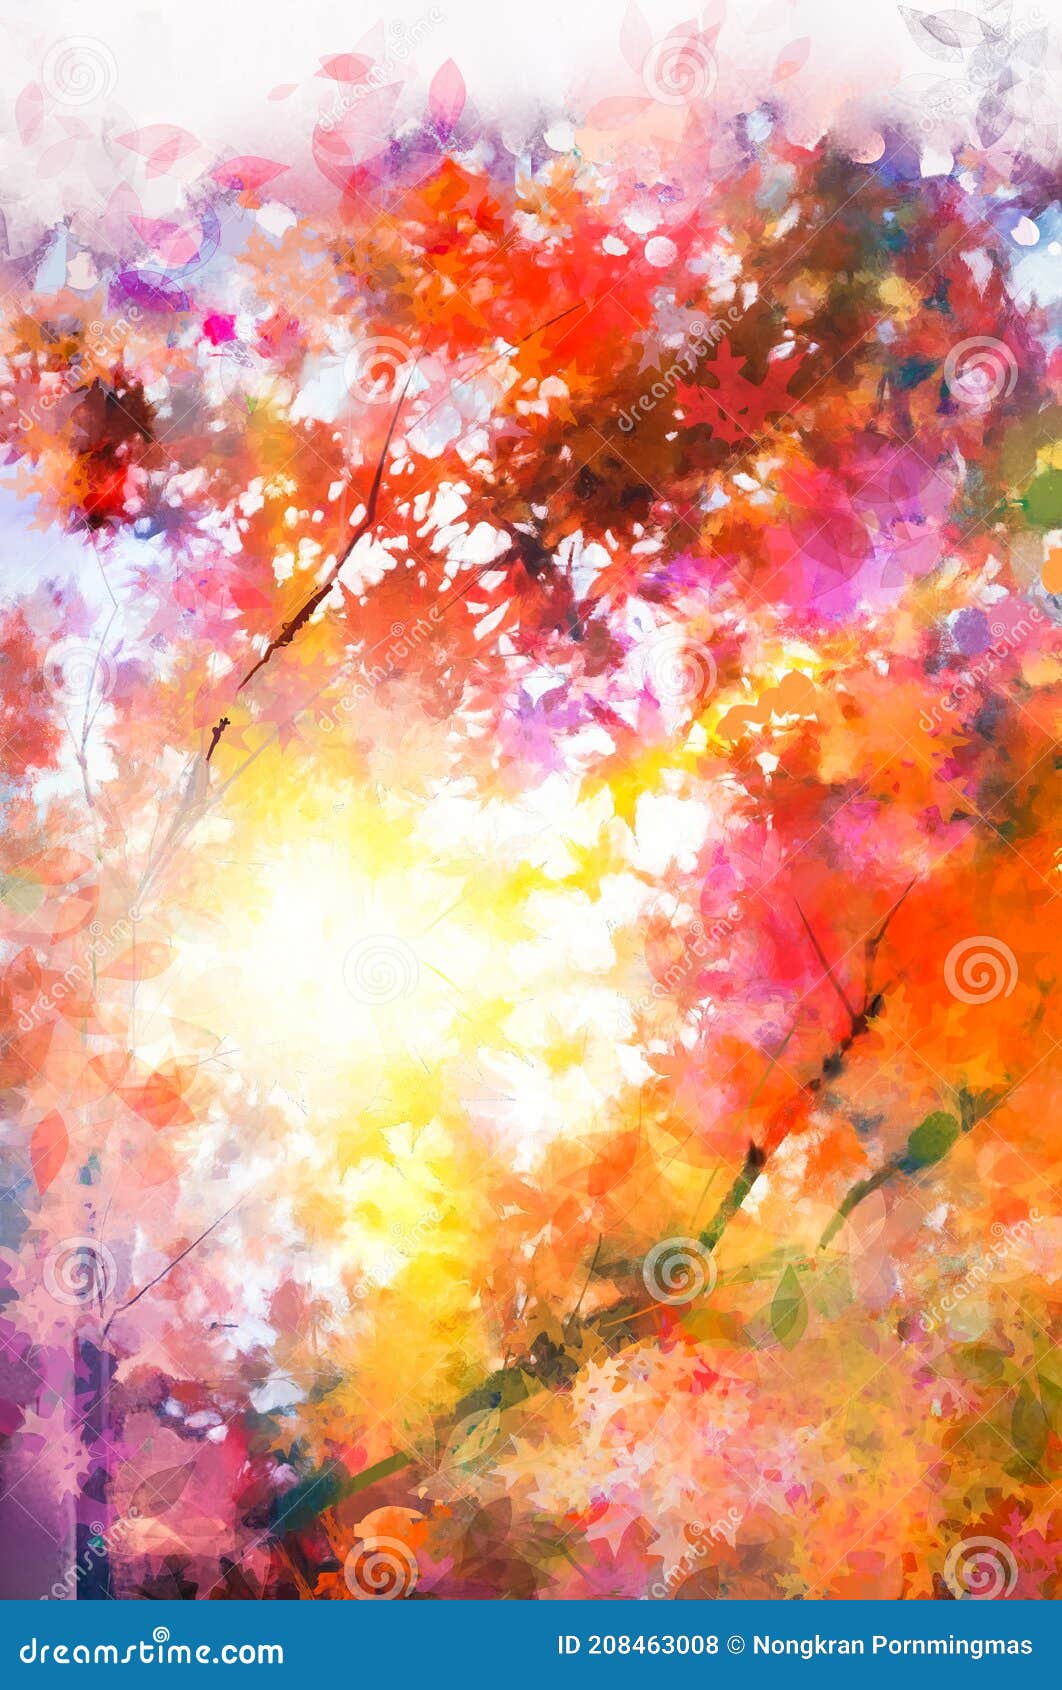 Orange Maple Leaf Pattern Abstract Watercolor Stock Illustration